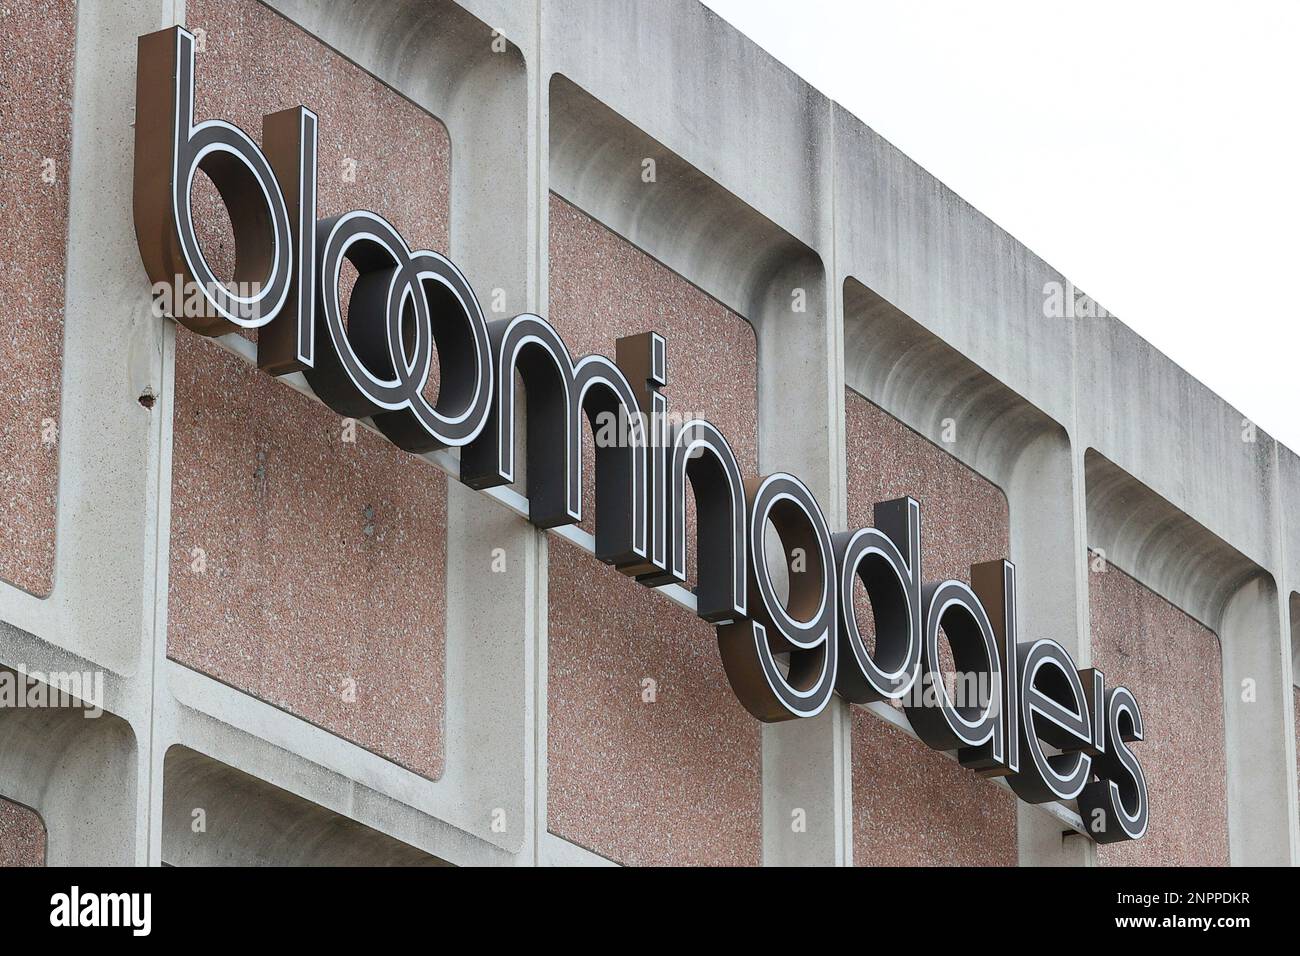 SHORT HILLS, NJ - MARCH 31: A general view of Bloomingdale's store sign at  the Mall at Short Hills, the Mall is closed as a result of the economic  impact of the